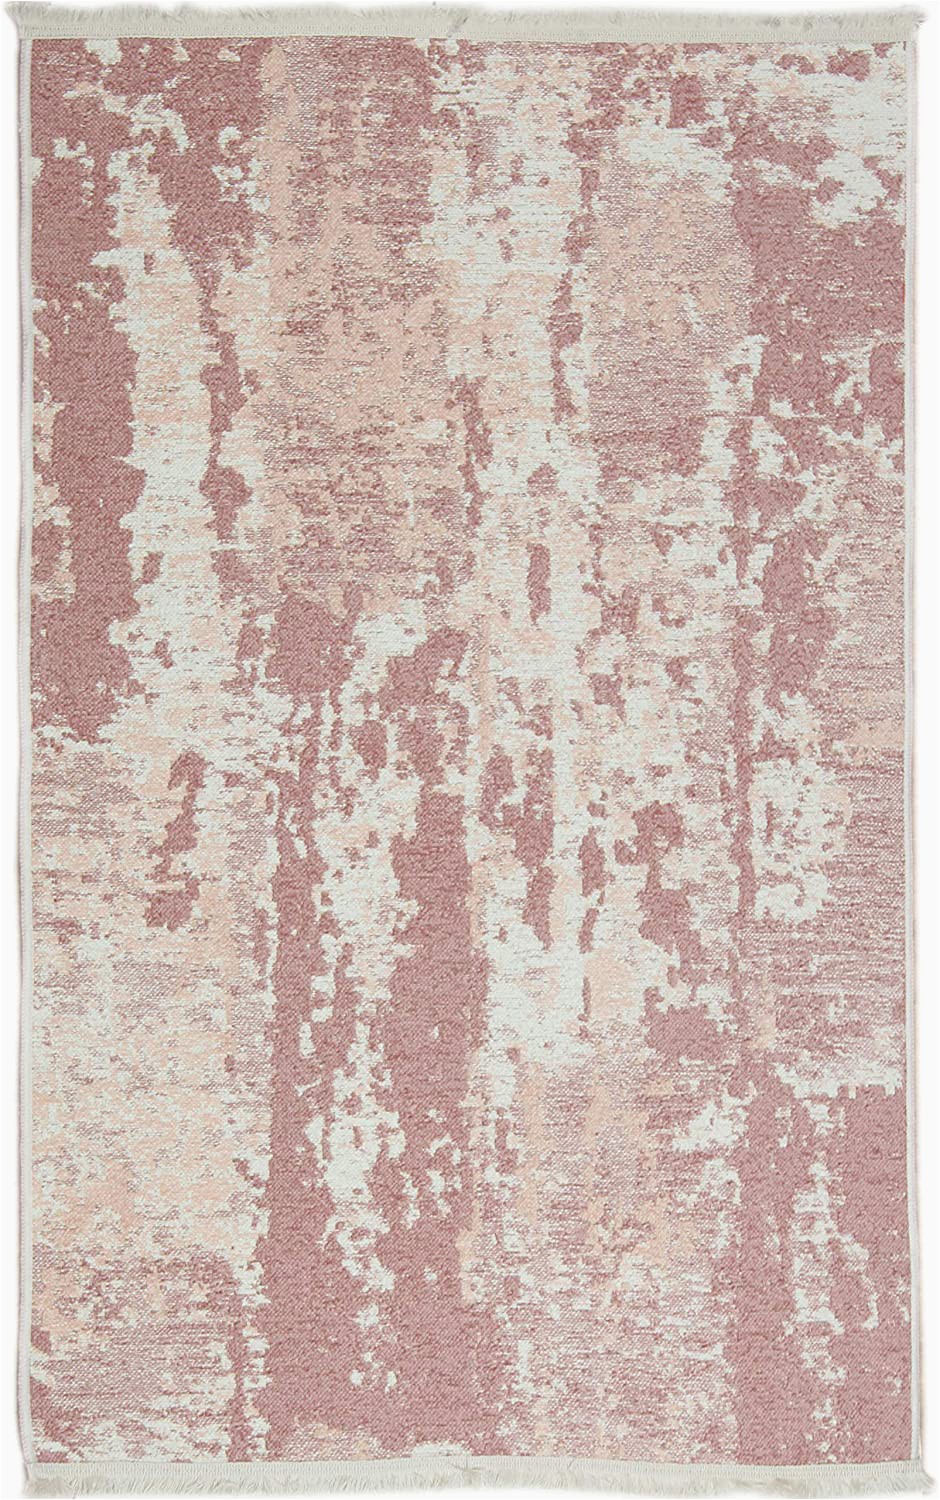 Pink and Cream area Rug Rugology Nk02 Cream Pink Reversible Double Sided Washable